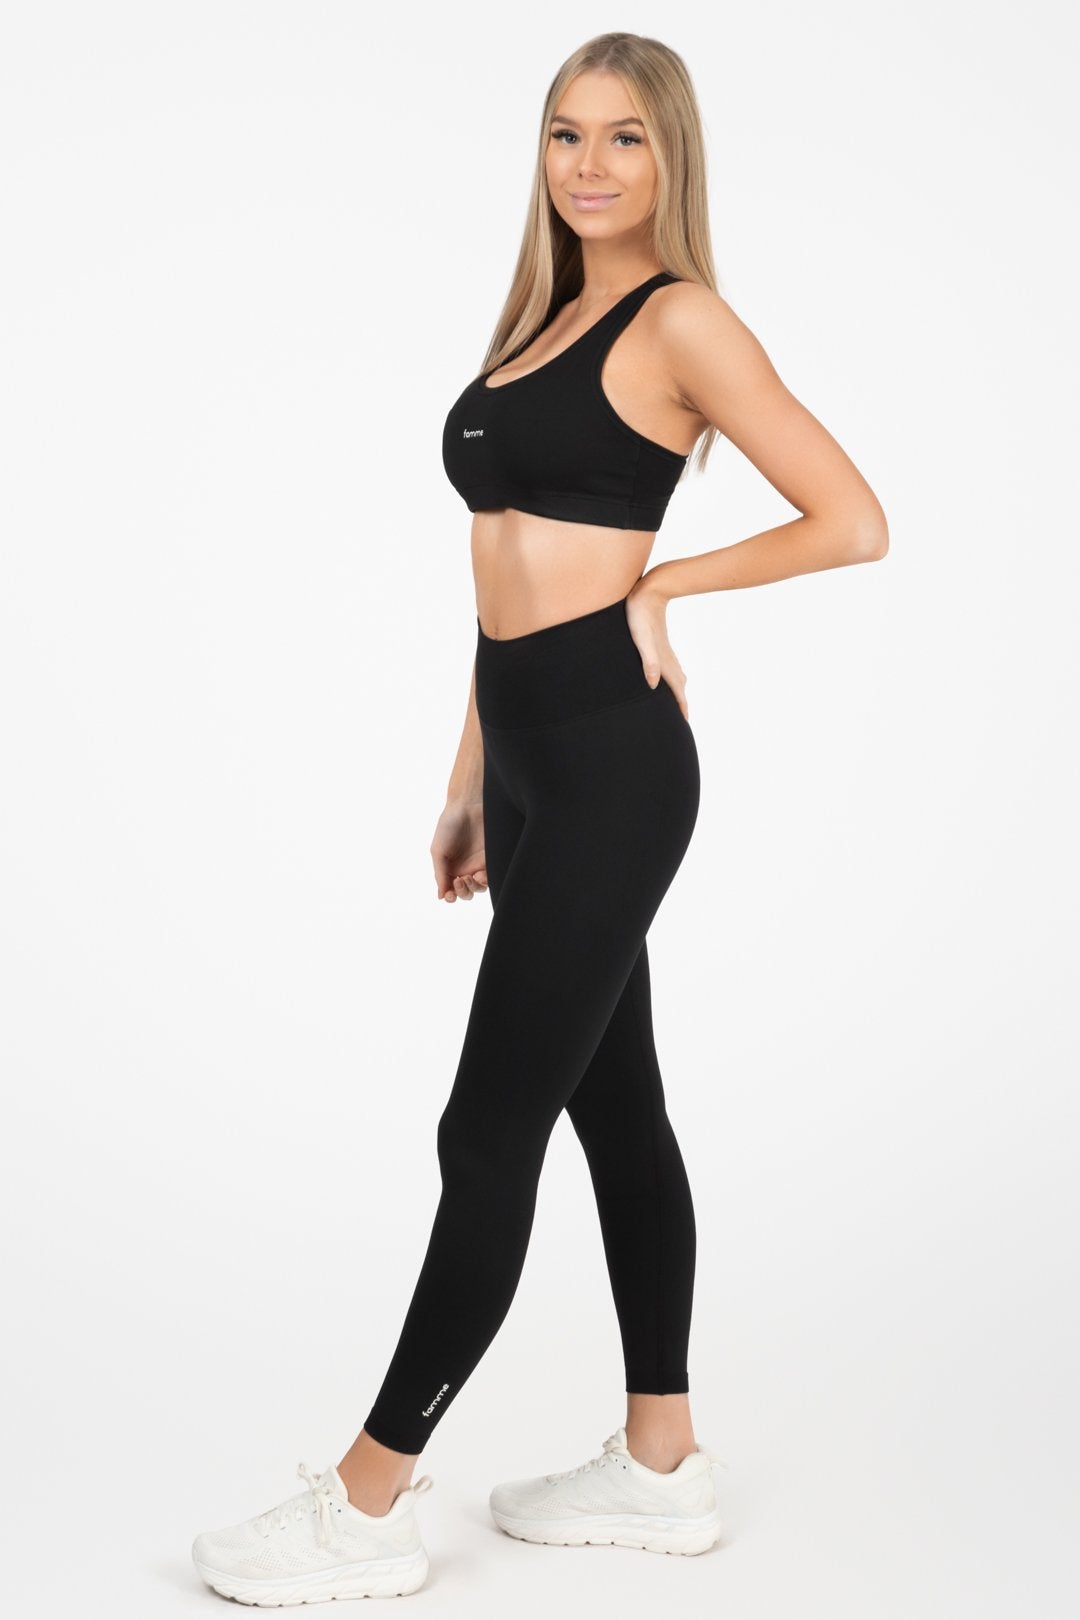 Famme Gym Tights - Leggings & Tights